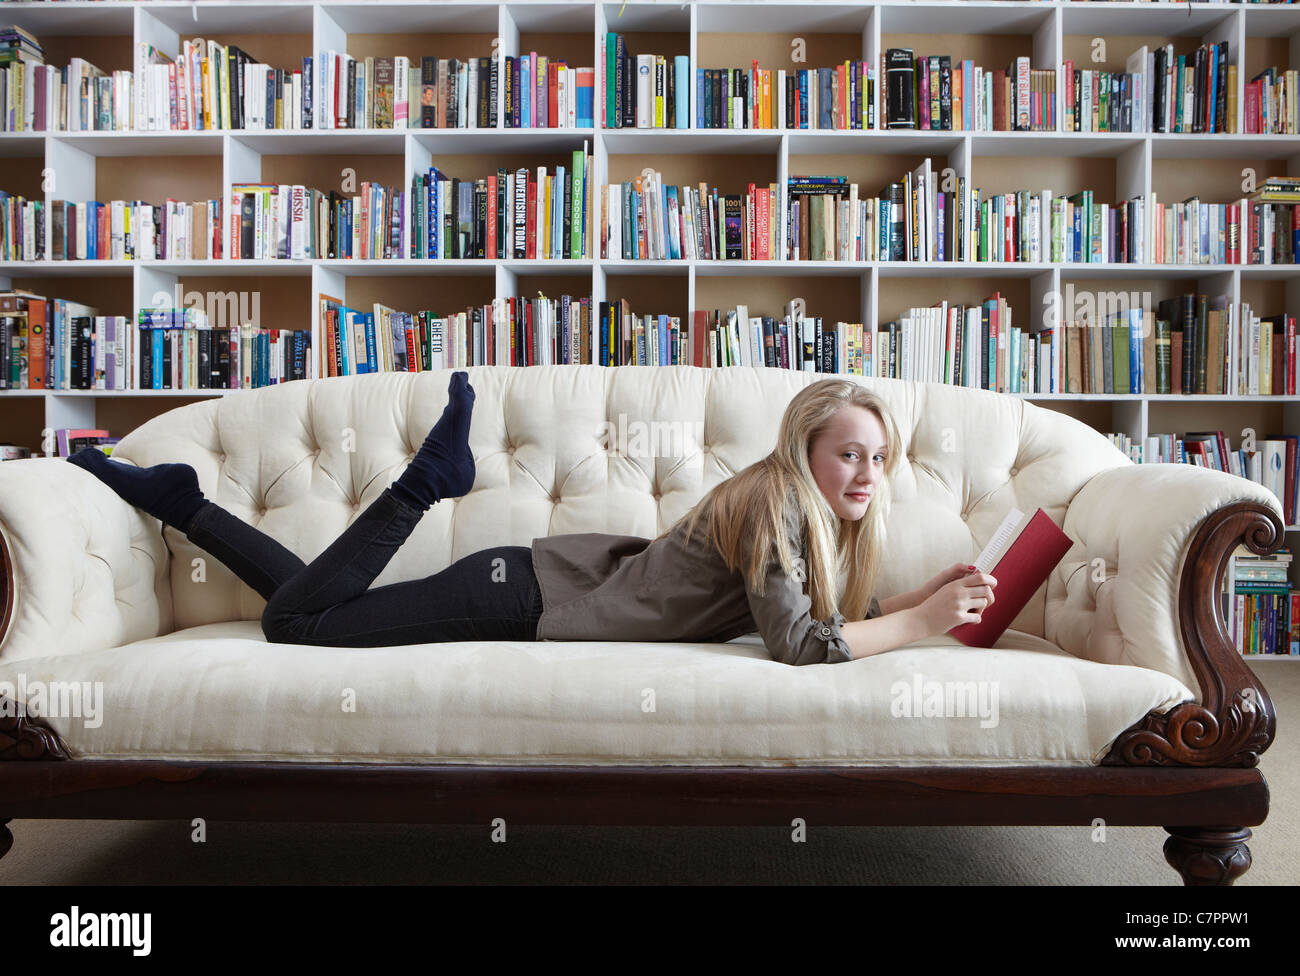 Girl reading on couch in library Stock Photo